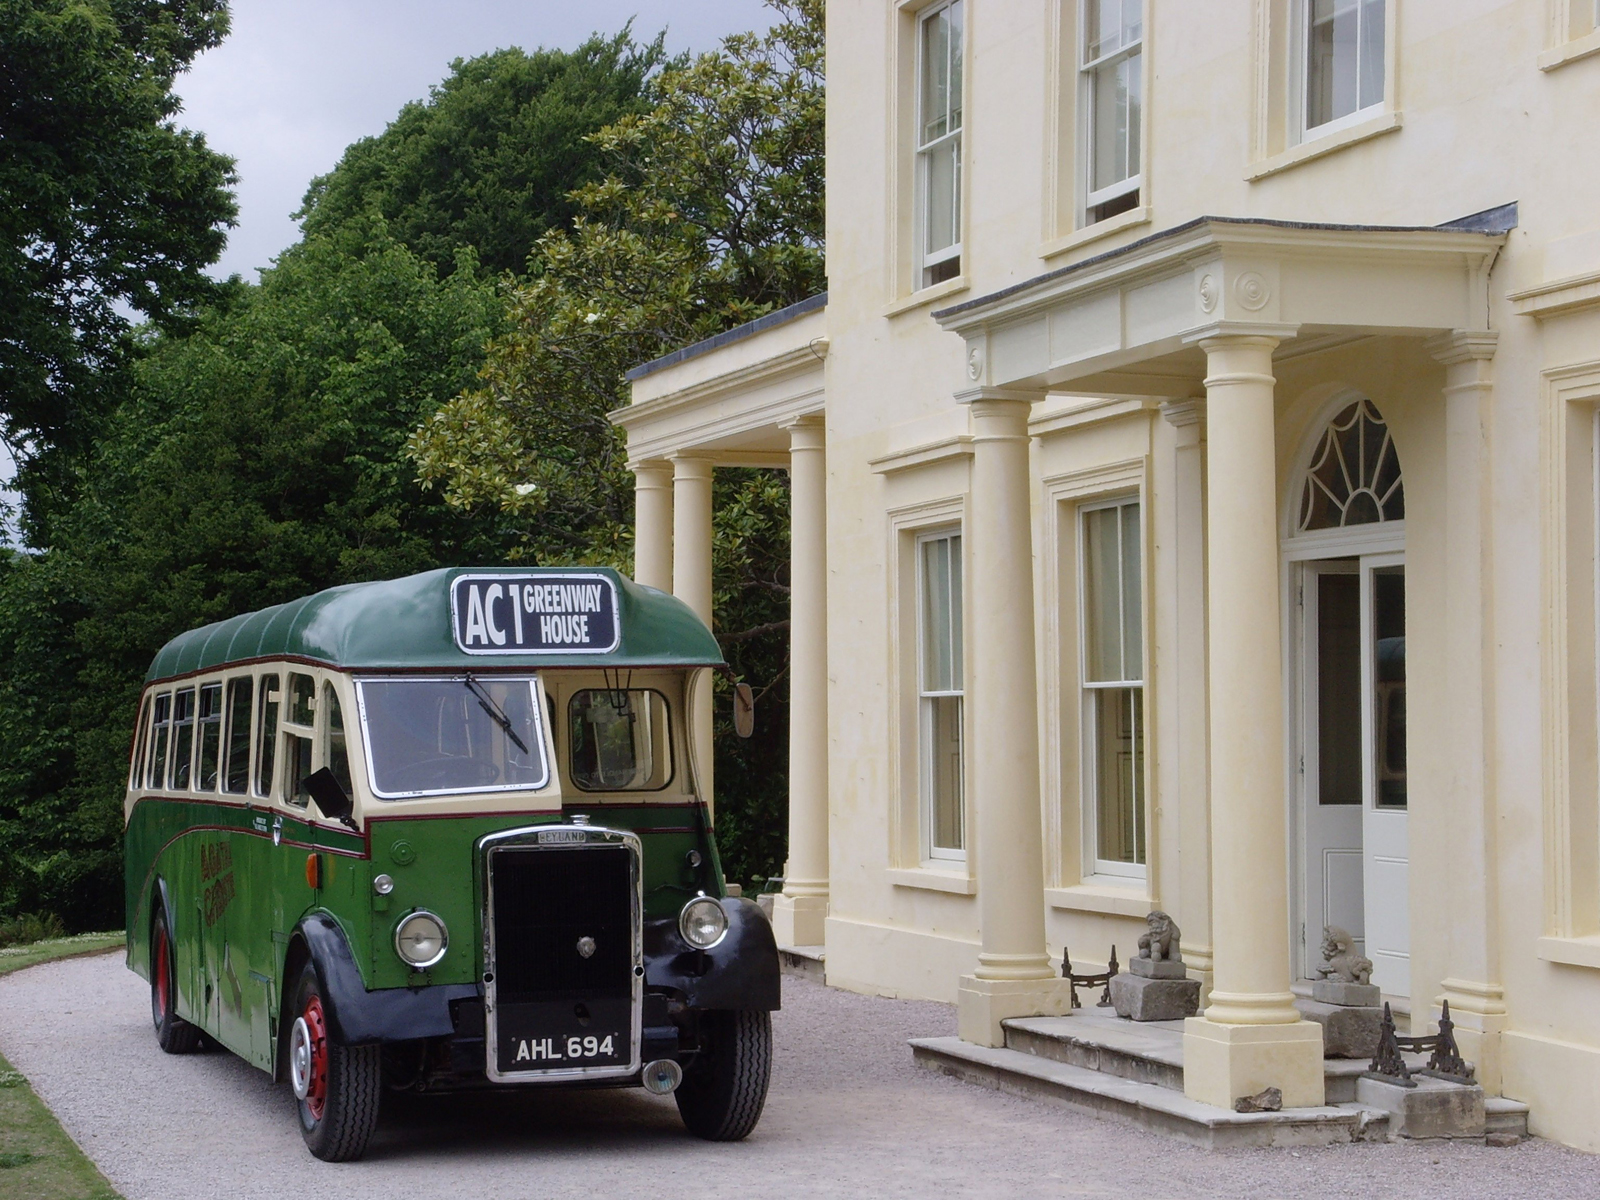 Greenway House, holiday home of Agatha Christie overlooking the River Dart